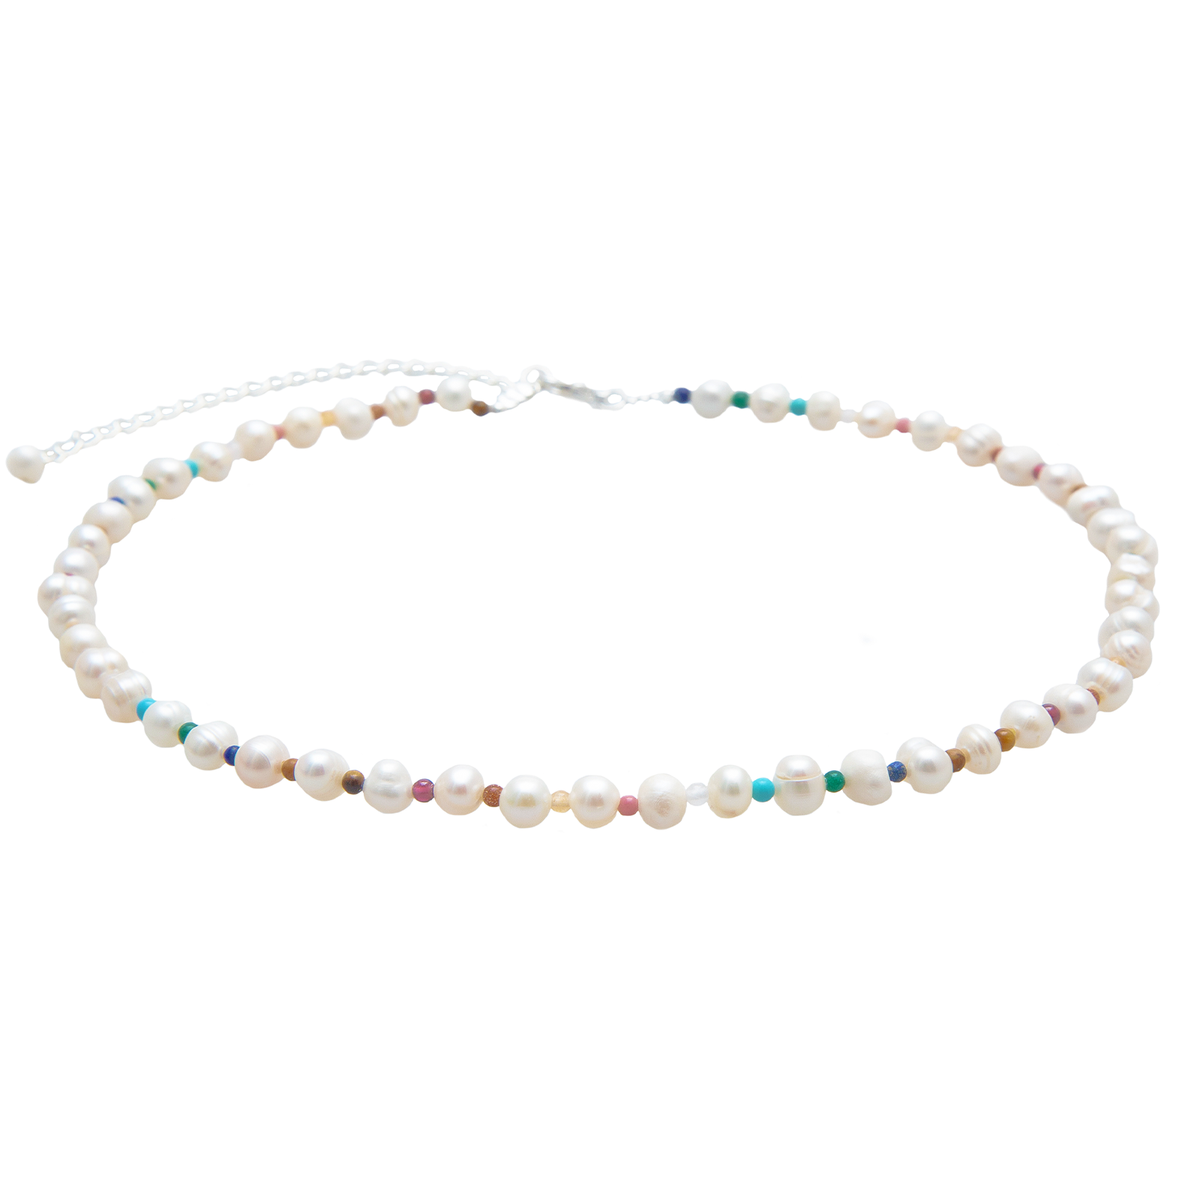 Pearl and multicolor stone healing necklace